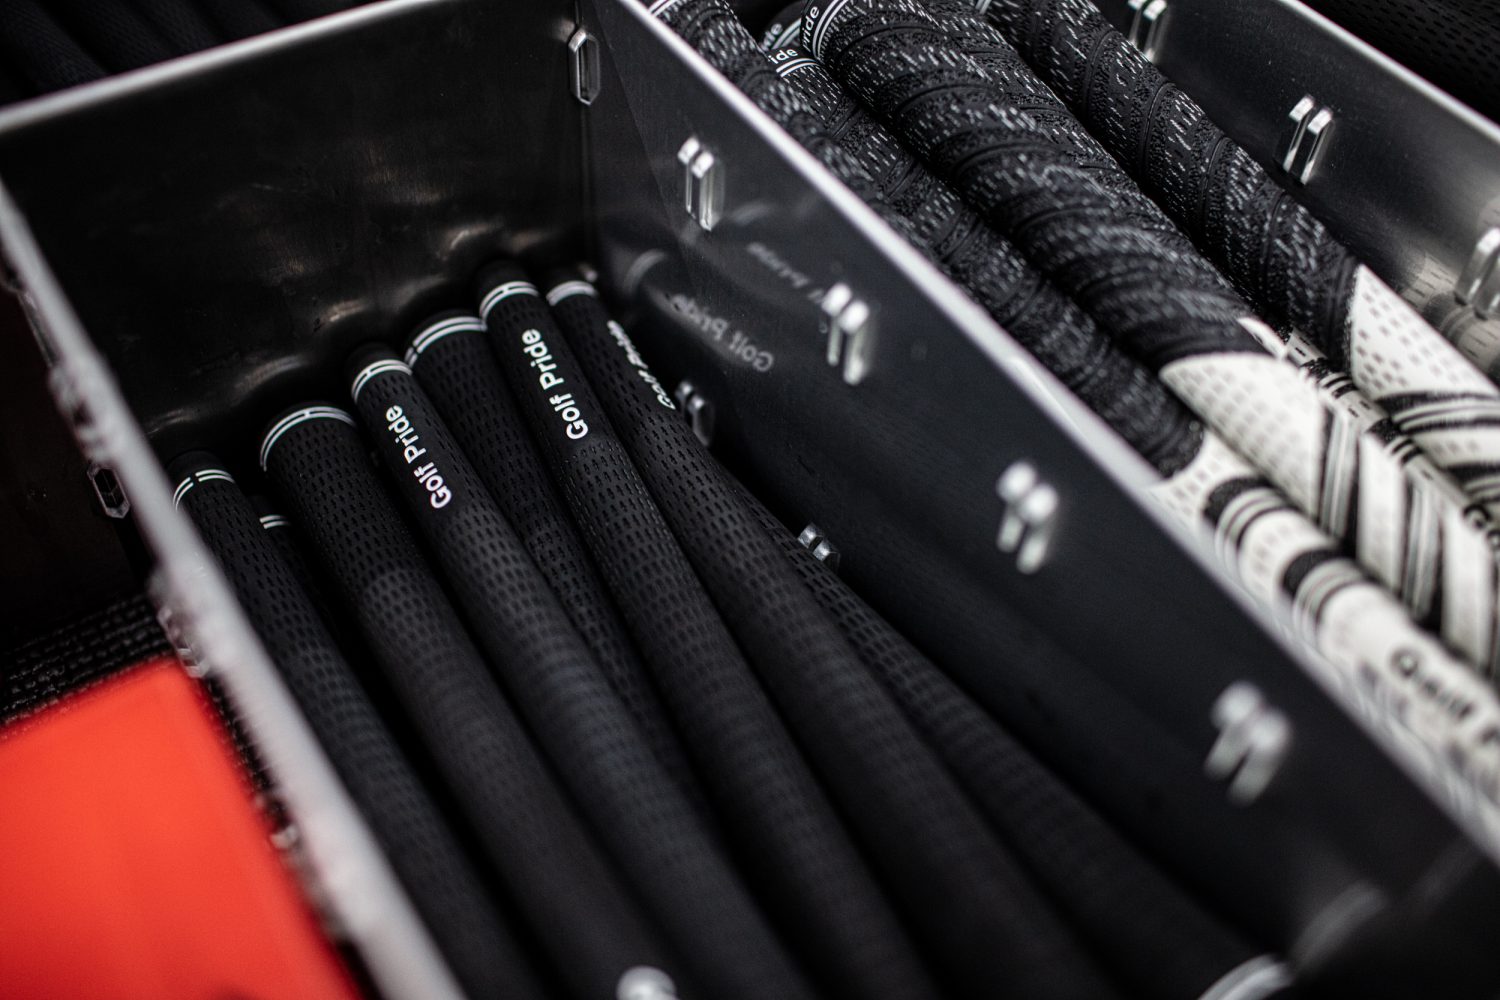 tour velvet and mcc grips in a tour truck drawer